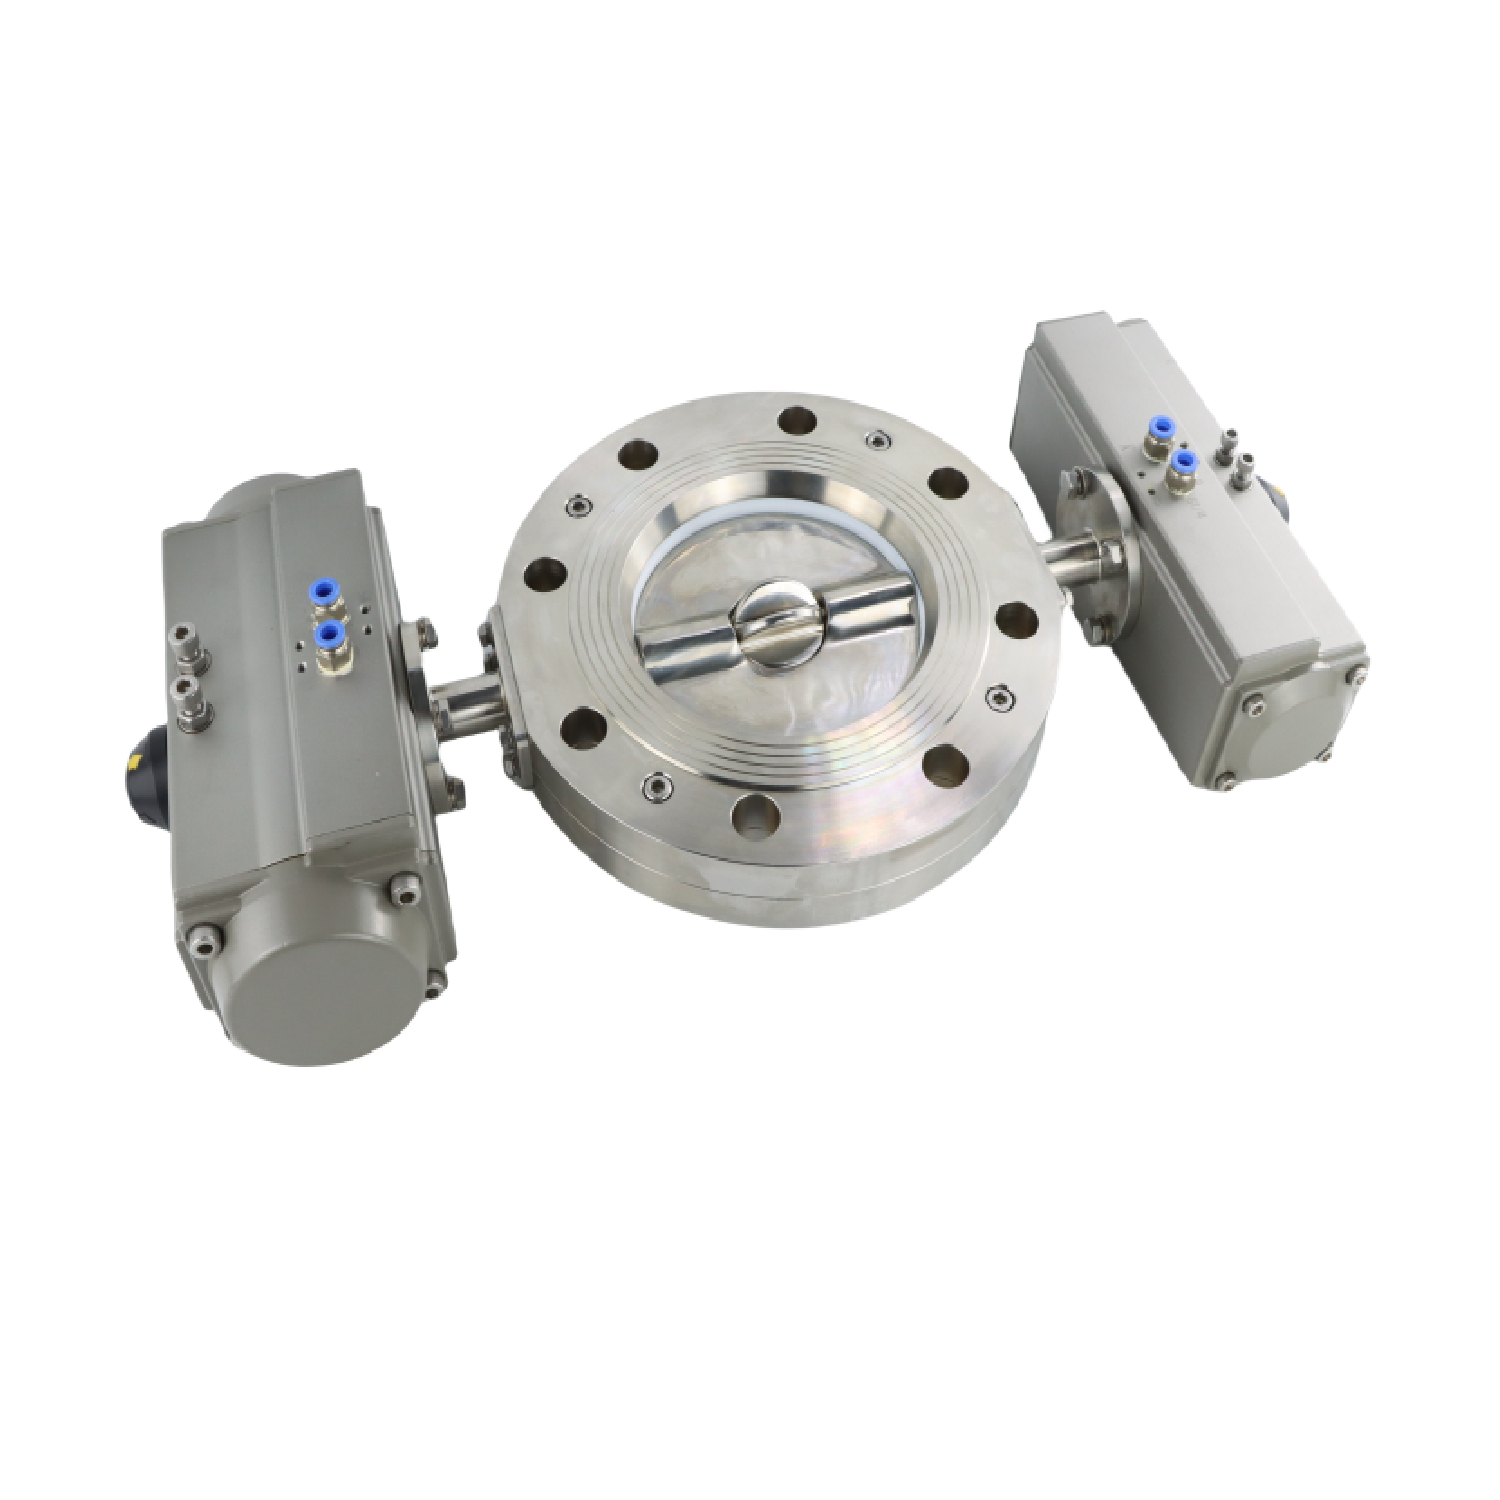 SS304 Stainless Steel Sanitary Grade JN-XW 23 1001 180degree Double Rotary Vane Valve for The Food Industry